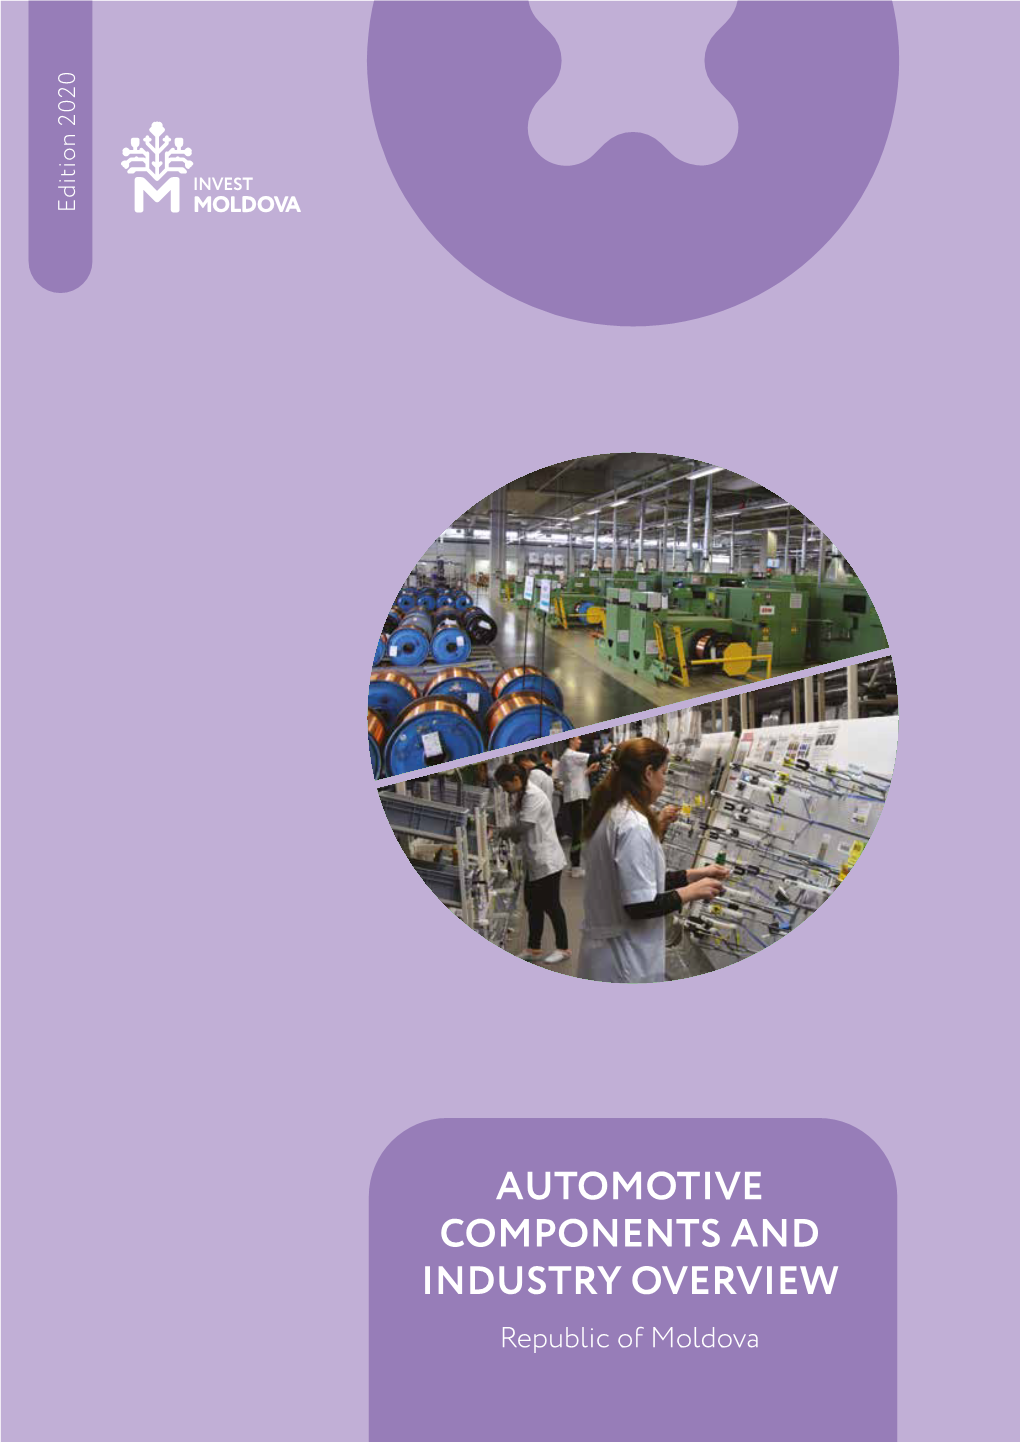 AUTOMOTIVE COMPONENTS and INDUSTRY OVERVIEW Republic of Moldova Name Doing Business Key Facts Republic of Moldova 2020 Rank 48 Capital: Chisinau Ca